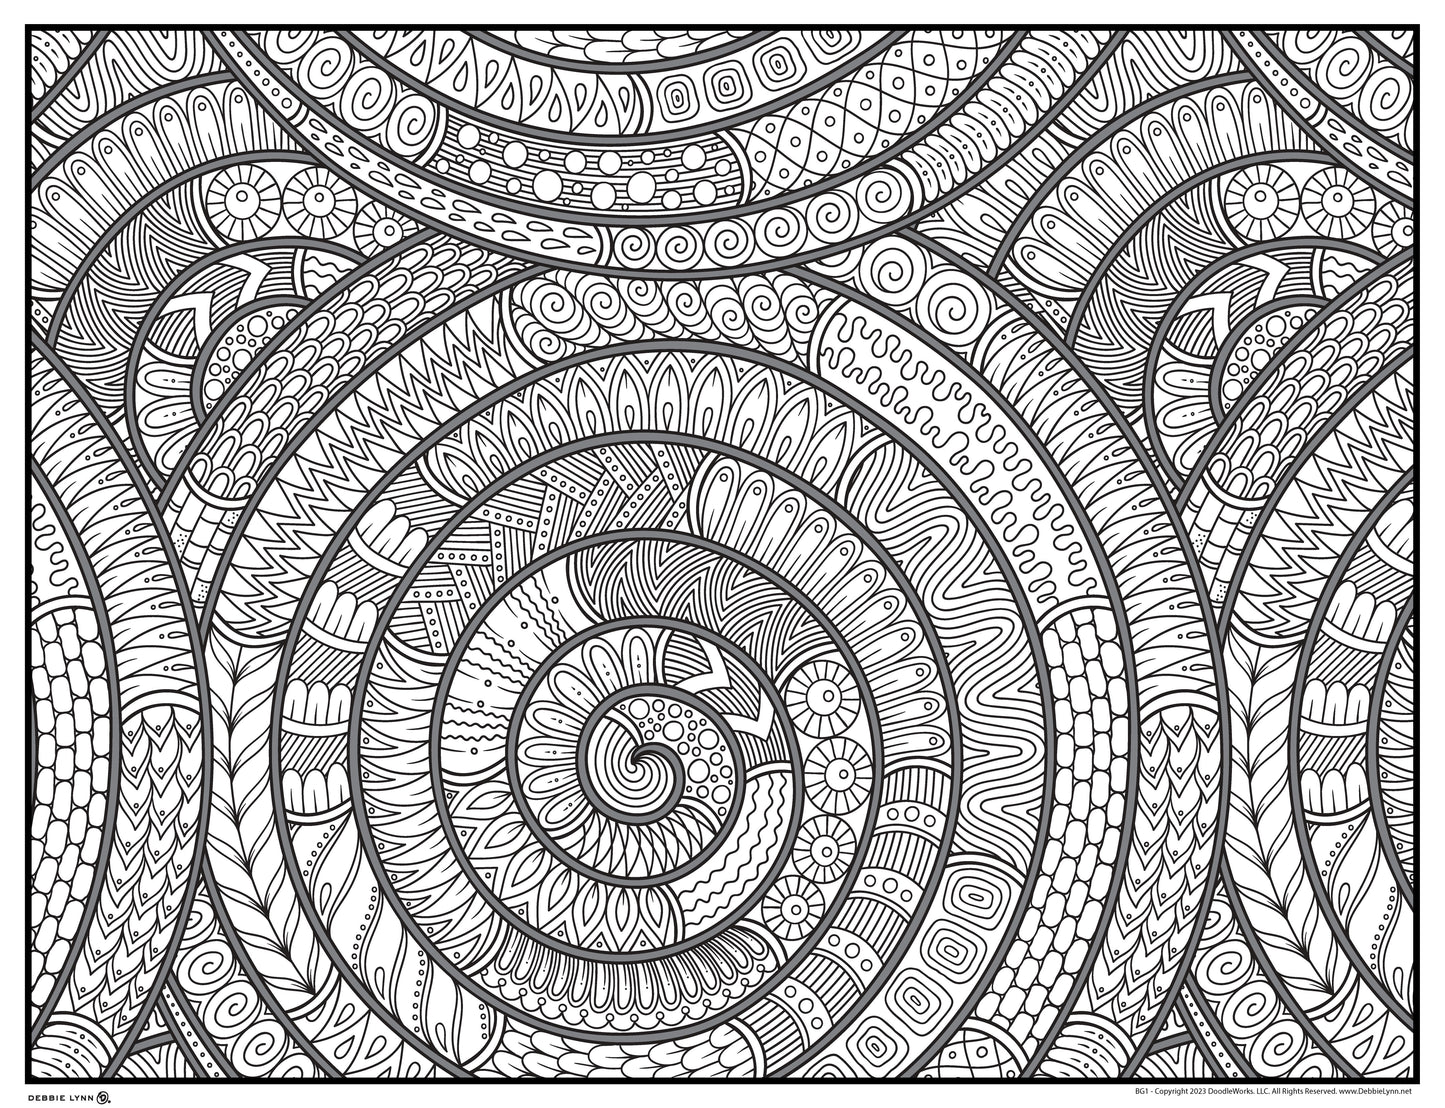 Background 1 Custom Personalized Giant Coloring Poster 46"x60"